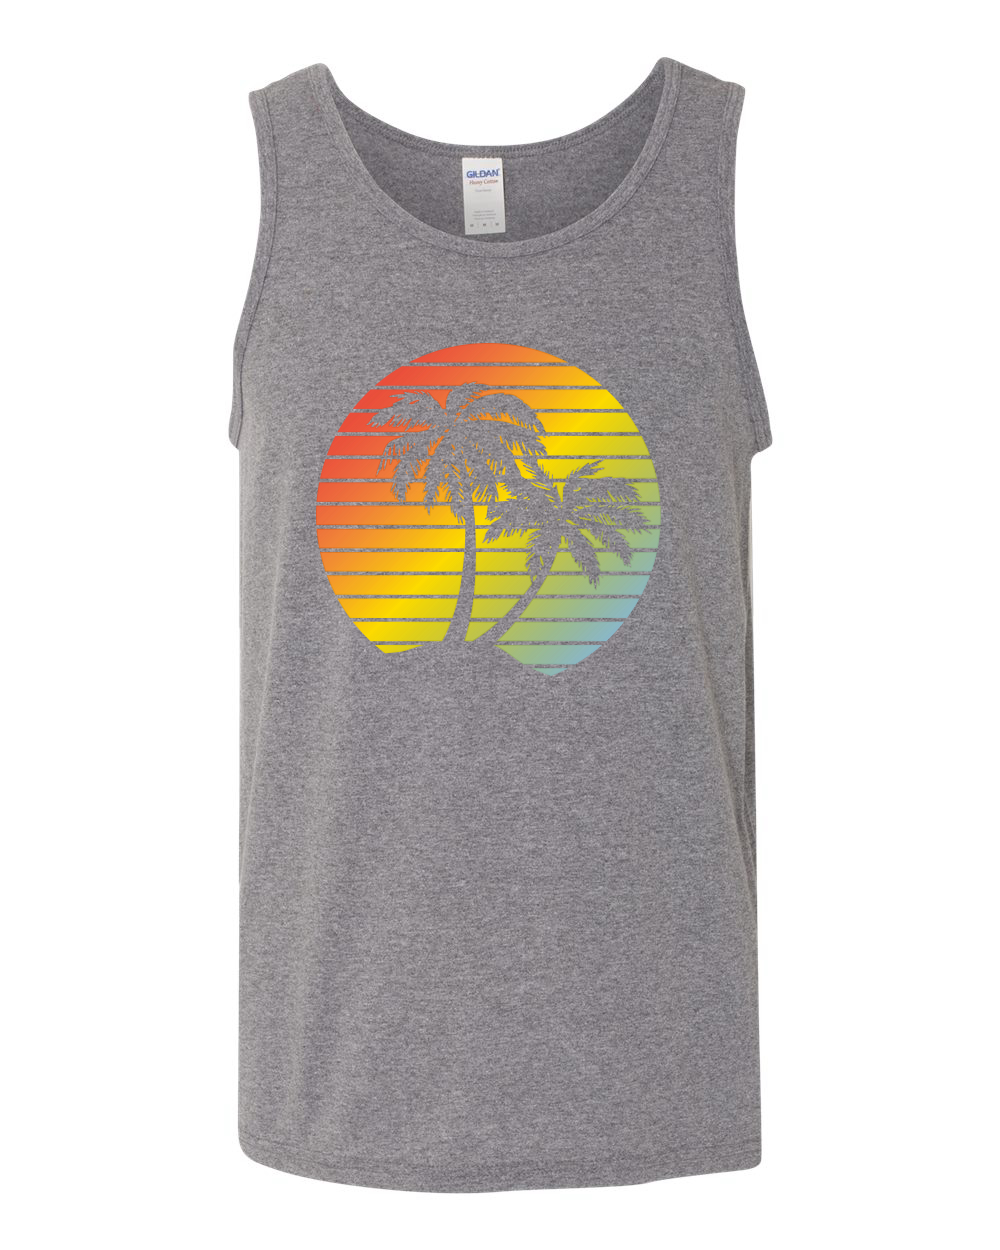 Two Coconut Palm Trees Beach Sunset | Mens Pop Culture Graphic Tank Top, Heather Grey, Small - image 2 of 4